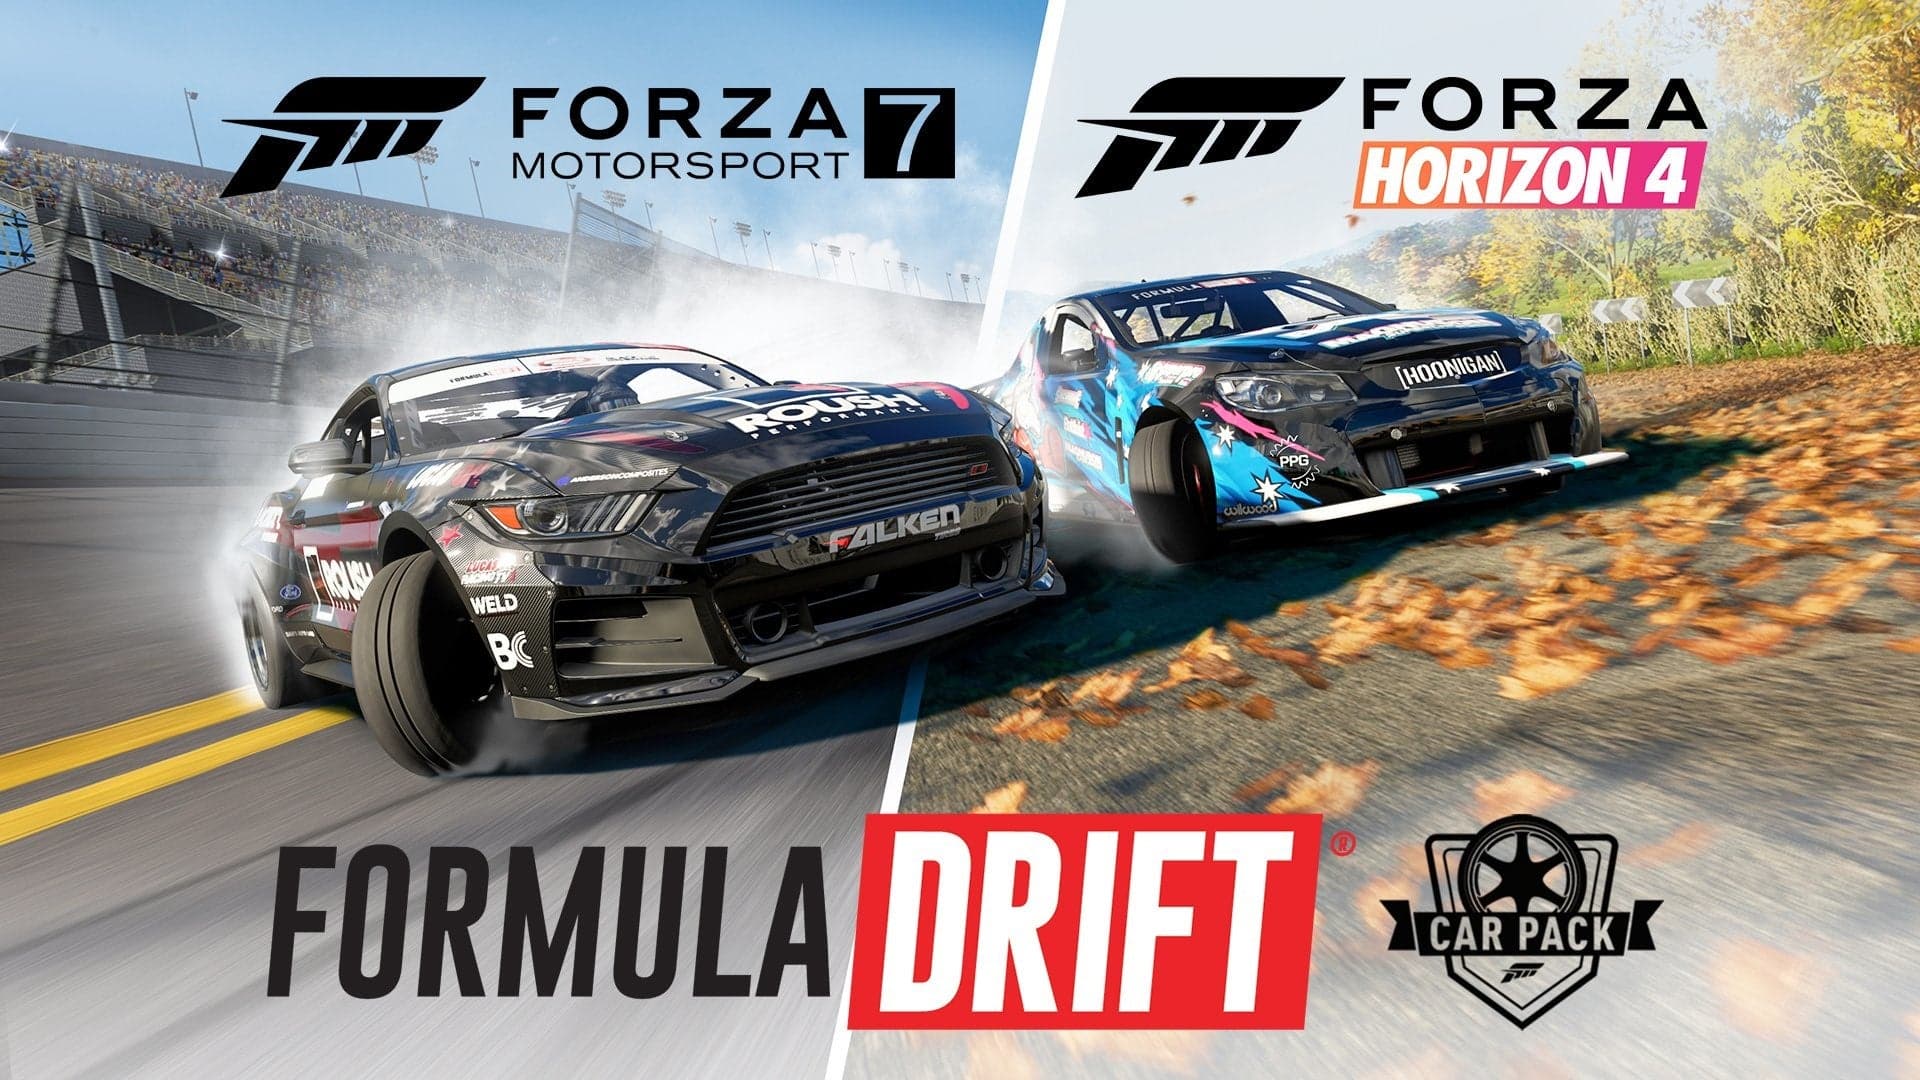 Formula Drift Car Pack Comes to Forza Motorsport 7 and Horizon 4